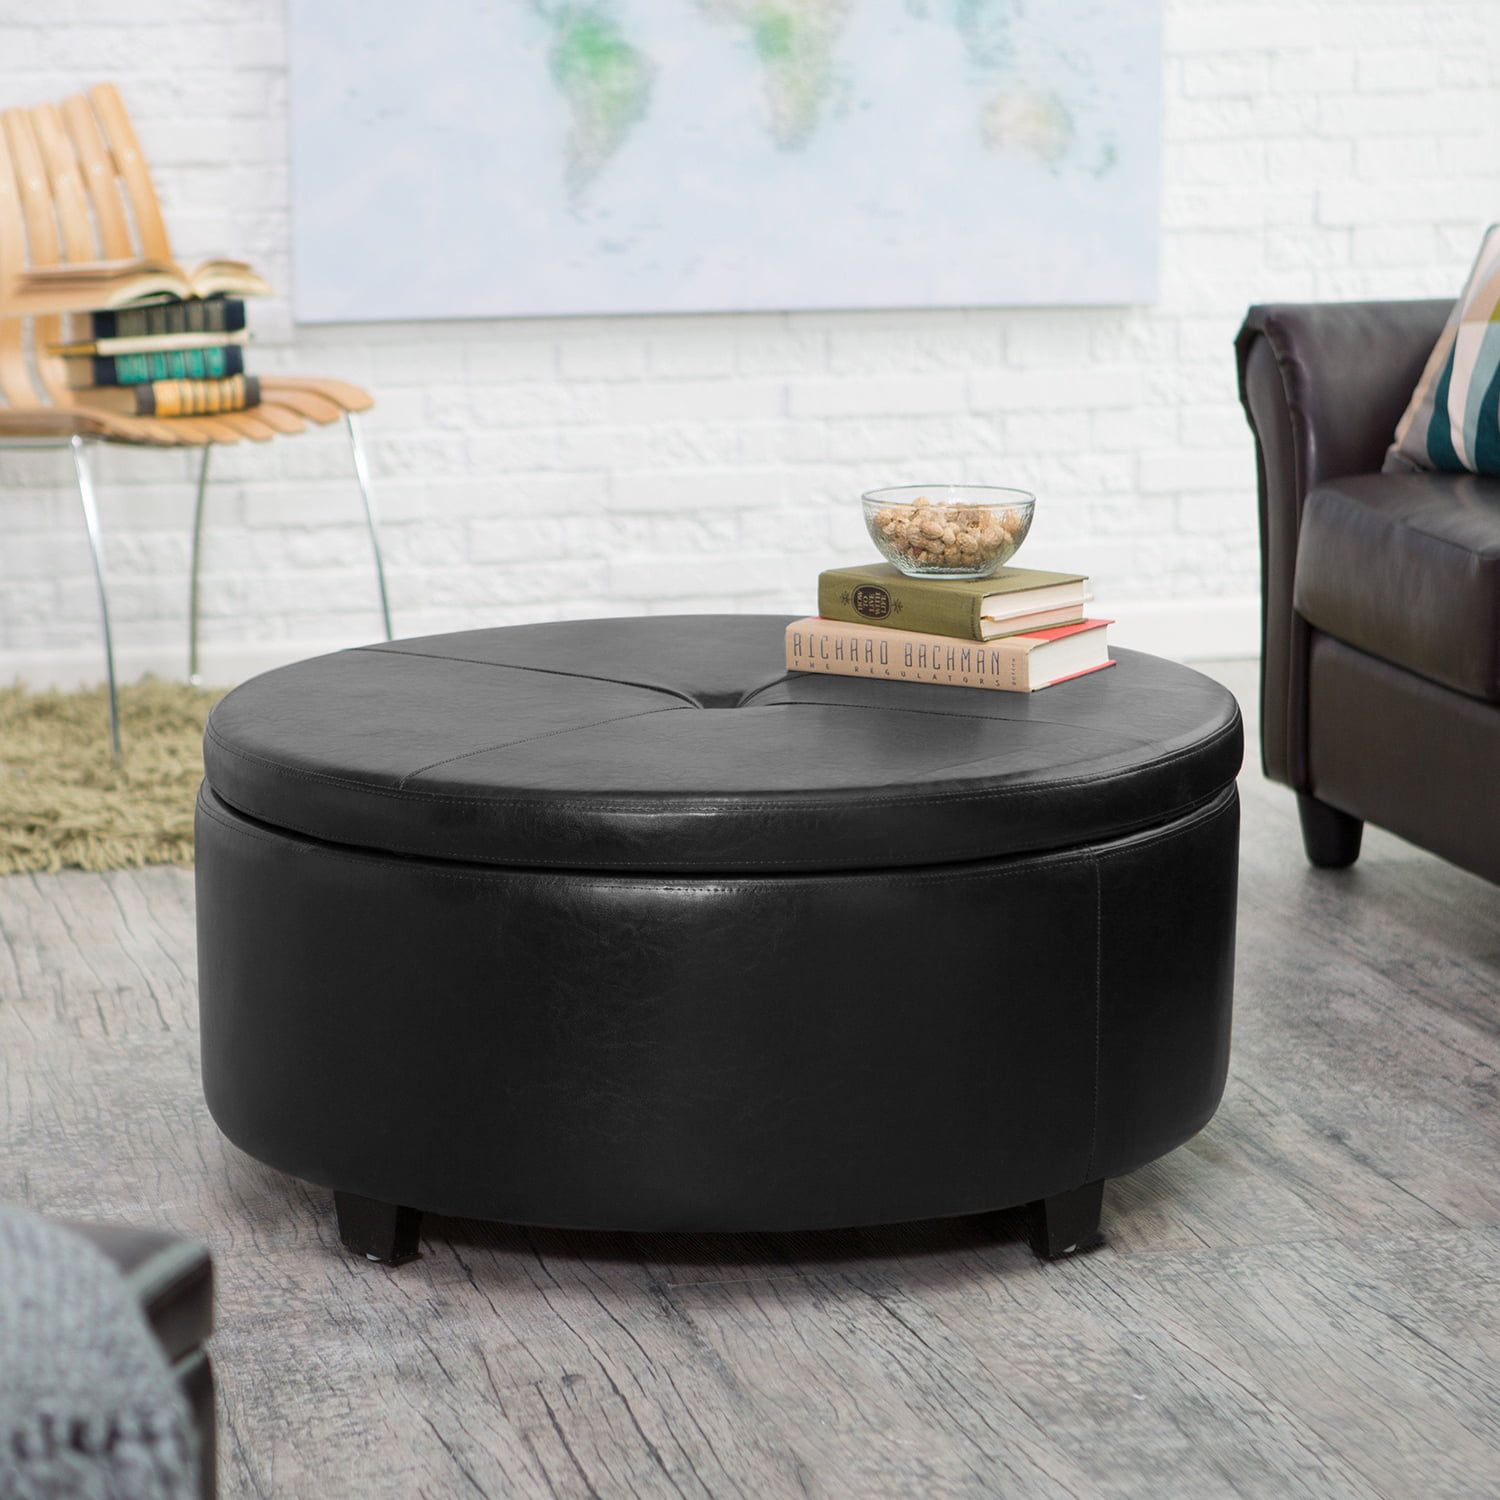 Lacoo Large Round Storage Ottoman Comfort Footrest, Black Faux Leather –  Walmart With Regard To Brown Wash Round Ottomans (View 15 of 15)